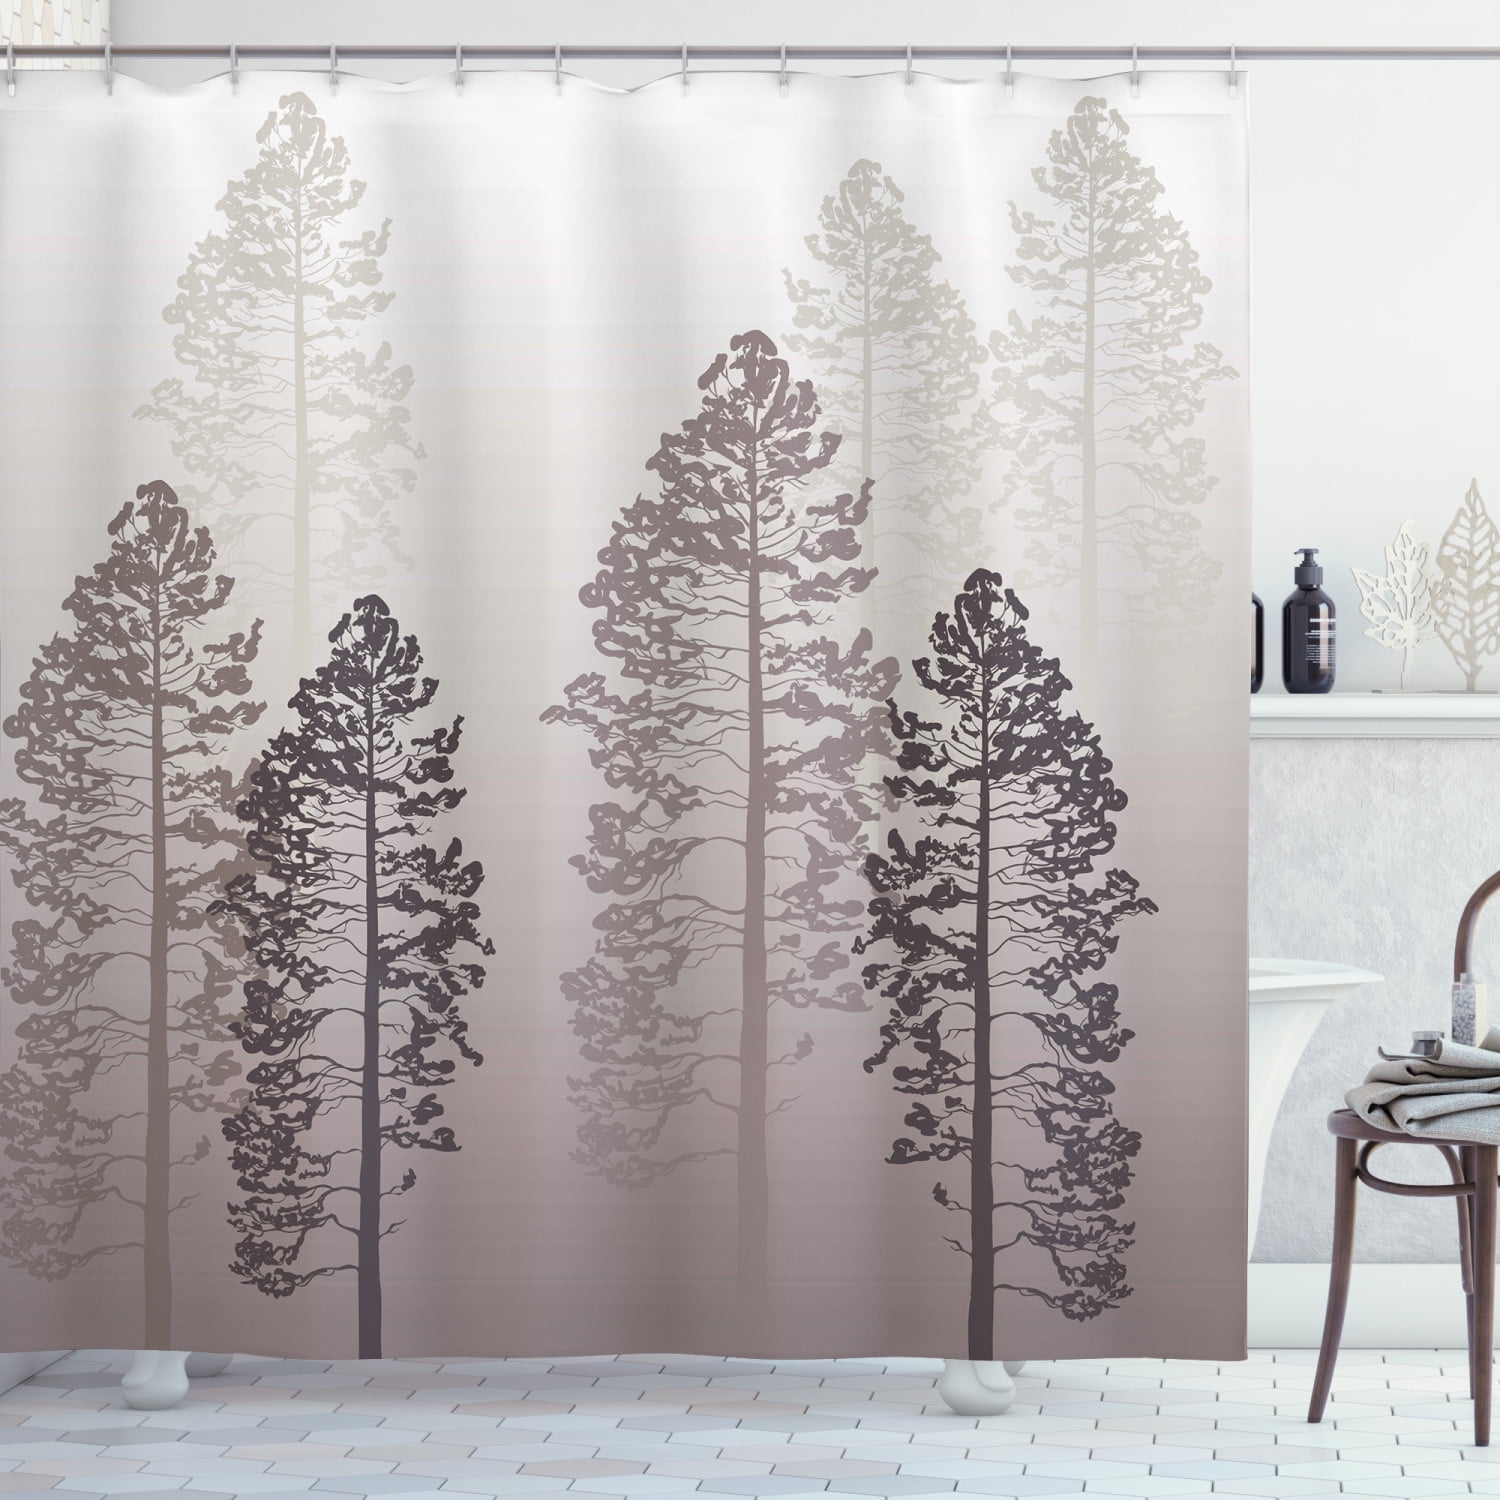 Details about   Roaring Brown Bear Forest Pine Trees Fabric Shower Curtain Set Bathroom Decor 